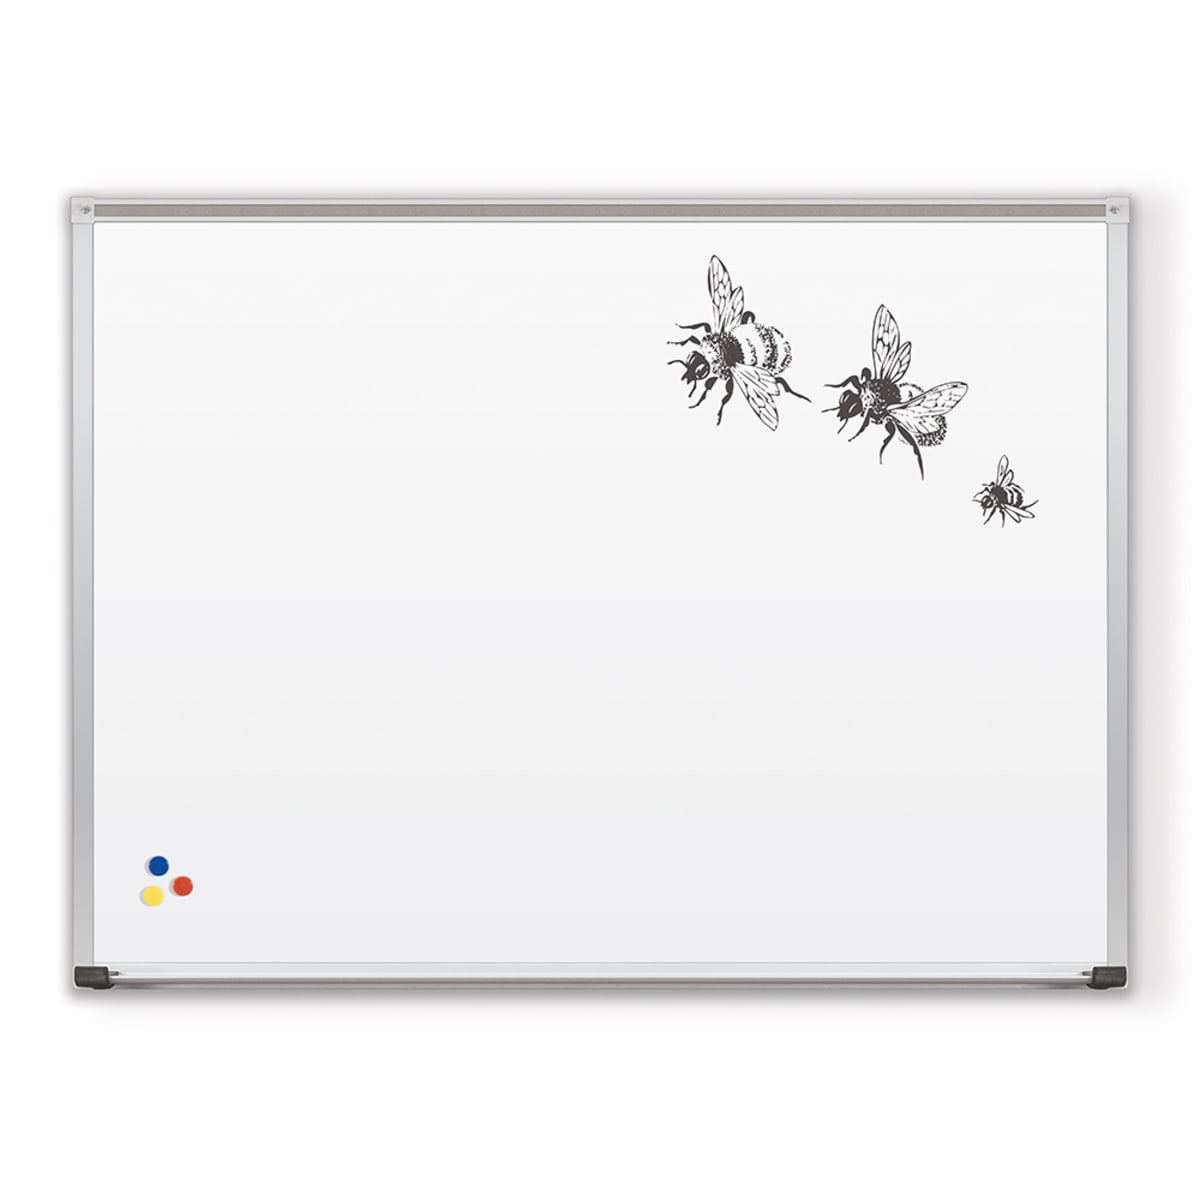 Mooreco Magne-Rite Whiteboard - Deluxe Aluminum Trim - 4'H x 8'W (Mooreco 219AH) - SchoolOutlet